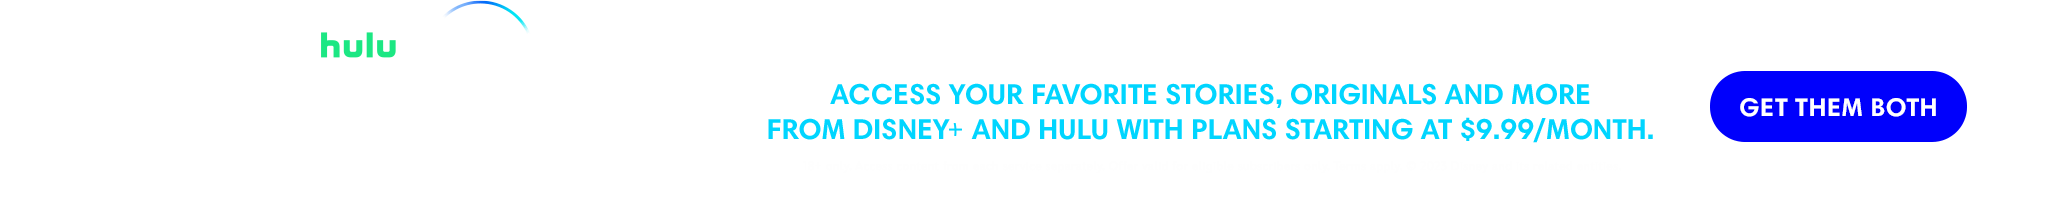 Hulu | Disney+ | Disney Bundle | Access your favorite stories, originals and more from Disney+ and Hulu with plans starting at $9.99/month. | Get them both. | 18+ only. Access content from each service separately. Offer valid for eligible subscribers only. Terms apply. © 2023 Disney and its related entities.